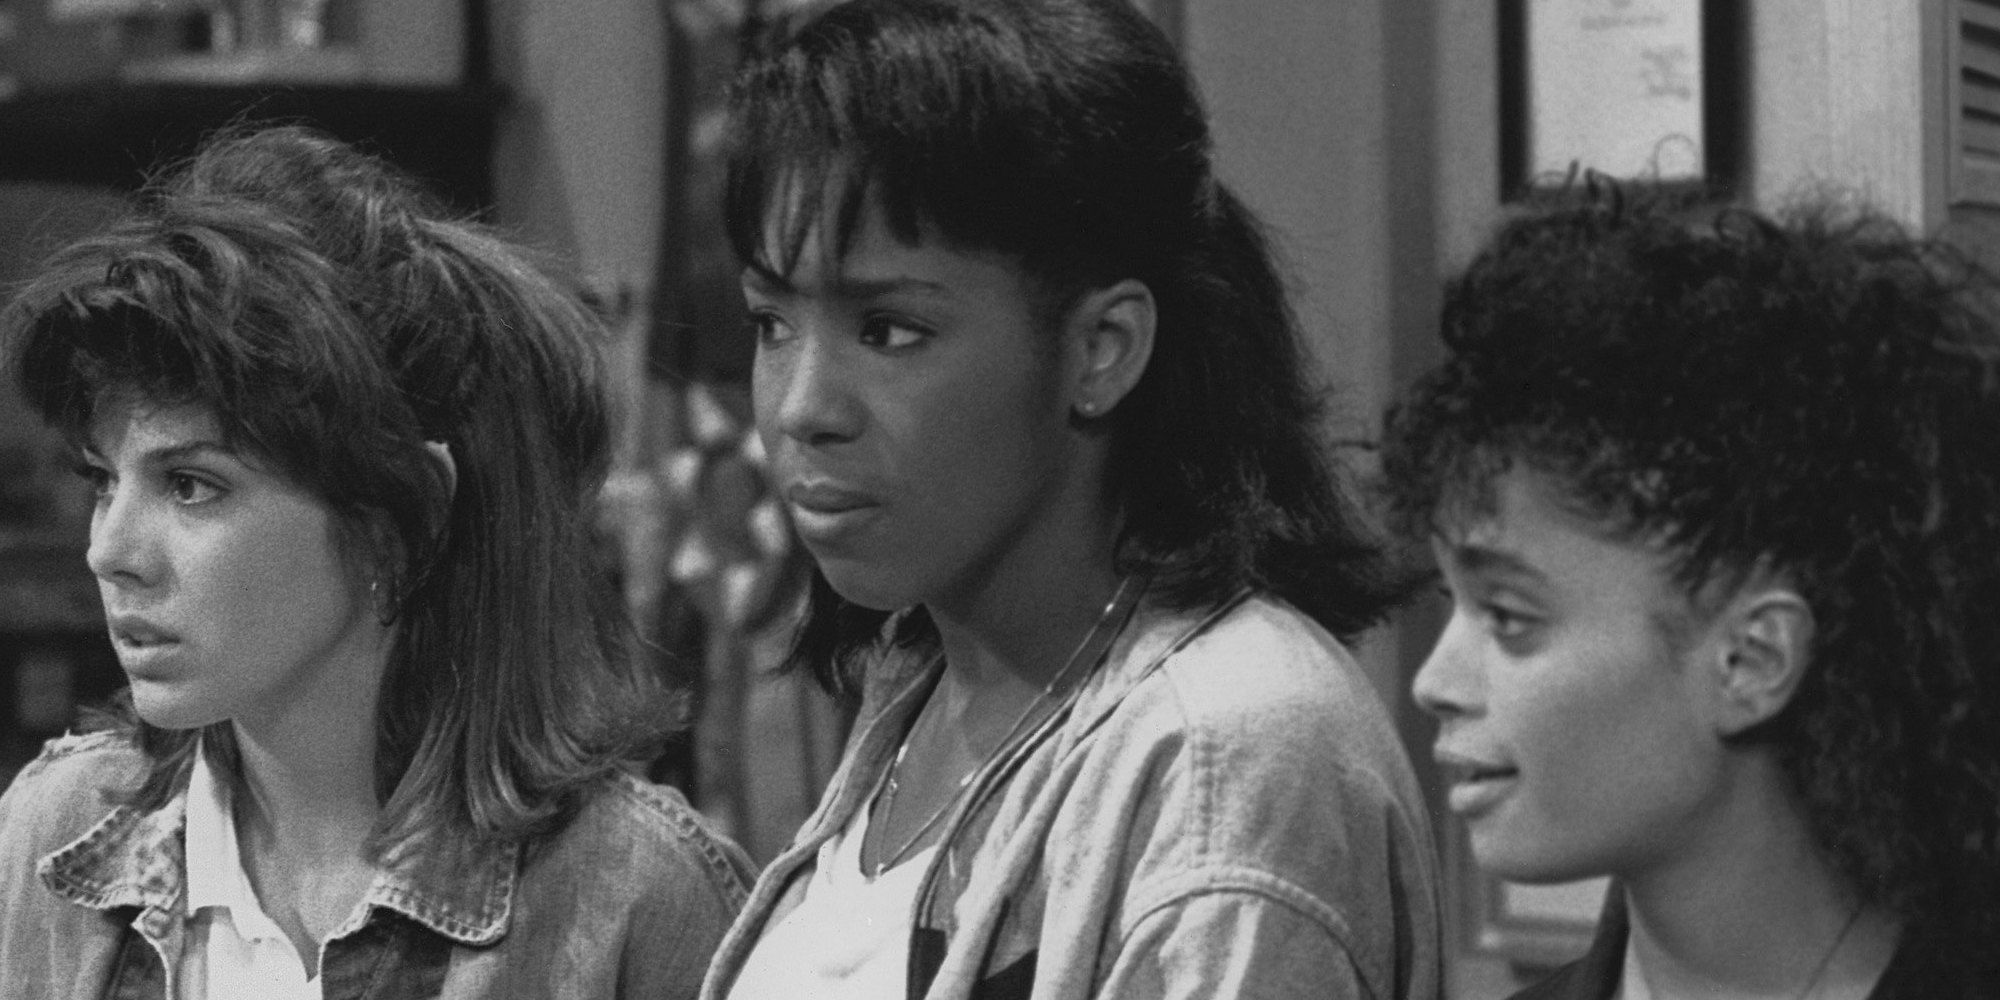 A Different World Starring Lisa Bonet and Marisa Tomei